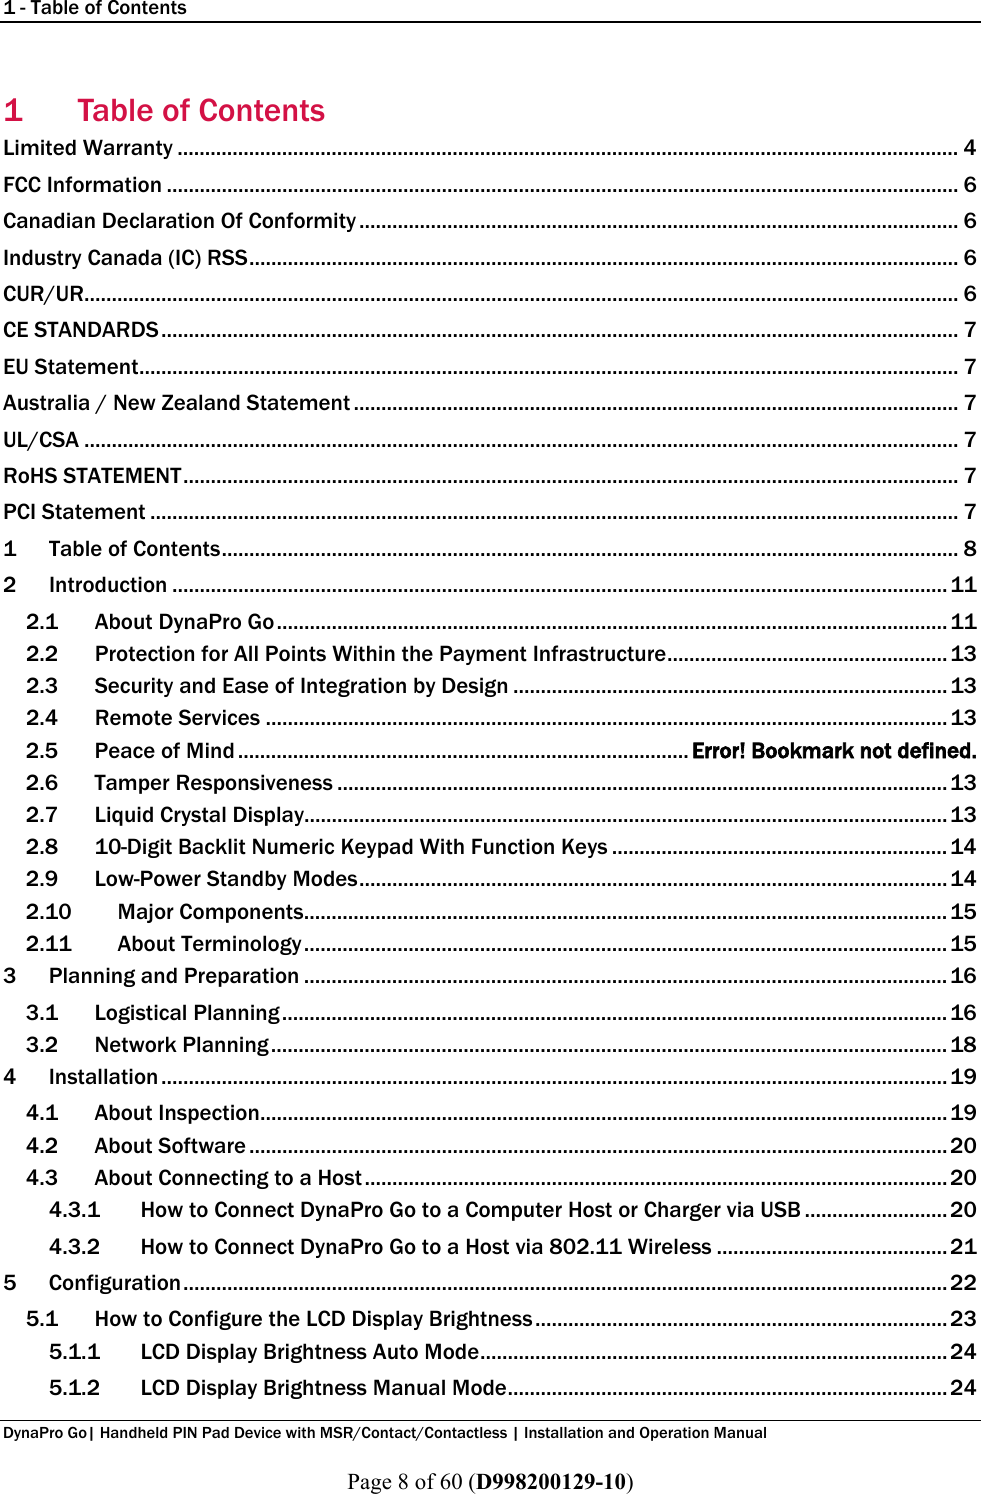 1 - Table of Contents  DynaPro Go| Handheld PIN Pad Device with MSR/Contact/Contactless | Installation and Operation Manual  Page 8 of 60 (D998200129-10) 1 Table of Contents Limited Warranty .............................................................................................................................................. 4 FCC Information ................................................................................................................................................ 6 Canadian Declaration Of Conformity ............................................................................................................. 6 Industry Canada (IC) RSS ................................................................................................................................. 6 CUR/UR............................................................................................................................................................... 6 CE STANDARDS ................................................................................................................................................. 7 EU Statement ..................................................................................................................................................... 7 Australia / New Zealand Statement .............................................................................................................. 7 UL/CSA ............................................................................................................................................................... 7 RoHS STATEMENT ............................................................................................................................................. 7 PCI Statement ................................................................................................................................................... 7 1 Table of Contents ...................................................................................................................................... 8 2 Introduction ............................................................................................................................................. 11 2.1 About DynaPro Go .......................................................................................................................... 11 2.2 Protection for All Points Within the Payment Infrastructure ................................................... 13 2.3 Security and Ease of Integration by Design ............................................................................... 13 2.4 Remote Services ............................................................................................................................ 13 2.5 Peace of Mind .................................................................................. Error! Bookmark not defined. 2.6 Tamper Responsiveness ............................................................................................................... 13 2.7 Liquid Crystal Display..................................................................................................................... 13 2.8 10-Digit Backlit Numeric Keypad With Function Keys ............................................................. 14 2.9 Low-Power Standby Modes ........................................................................................................... 14 2.10 Major Components ..................................................................................................................... 15 2.11 About Terminology ..................................................................................................................... 15 3 Planning and Preparation ..................................................................................................................... 16 3.1 Logistical Planning ......................................................................................................................... 16 3.2 Network Planning ........................................................................................................................... 18 4 Installation ............................................................................................................................................... 19 4.1 About Inspection ............................................................................................................................. 19 4.2 About Software ............................................................................................................................... 20 4.3 About Connecting to a Host .......................................................................................................... 20 4.3.1 How to Connect DynaPro Go to a Computer Host or Charger via USB .......................... 20 4.3.2 How to Connect DynaPro Go to a Host via 802.11 Wireless .......................................... 21 5 Configuration ........................................................................................................................................... 22 5.1 How to Configure the LCD Display Brightness ........................................................................... 23 5.1.1 LCD Display Brightness Auto Mode ..................................................................................... 24 5.1.2 LCD Display Brightness Manual Mode ................................................................................ 24 